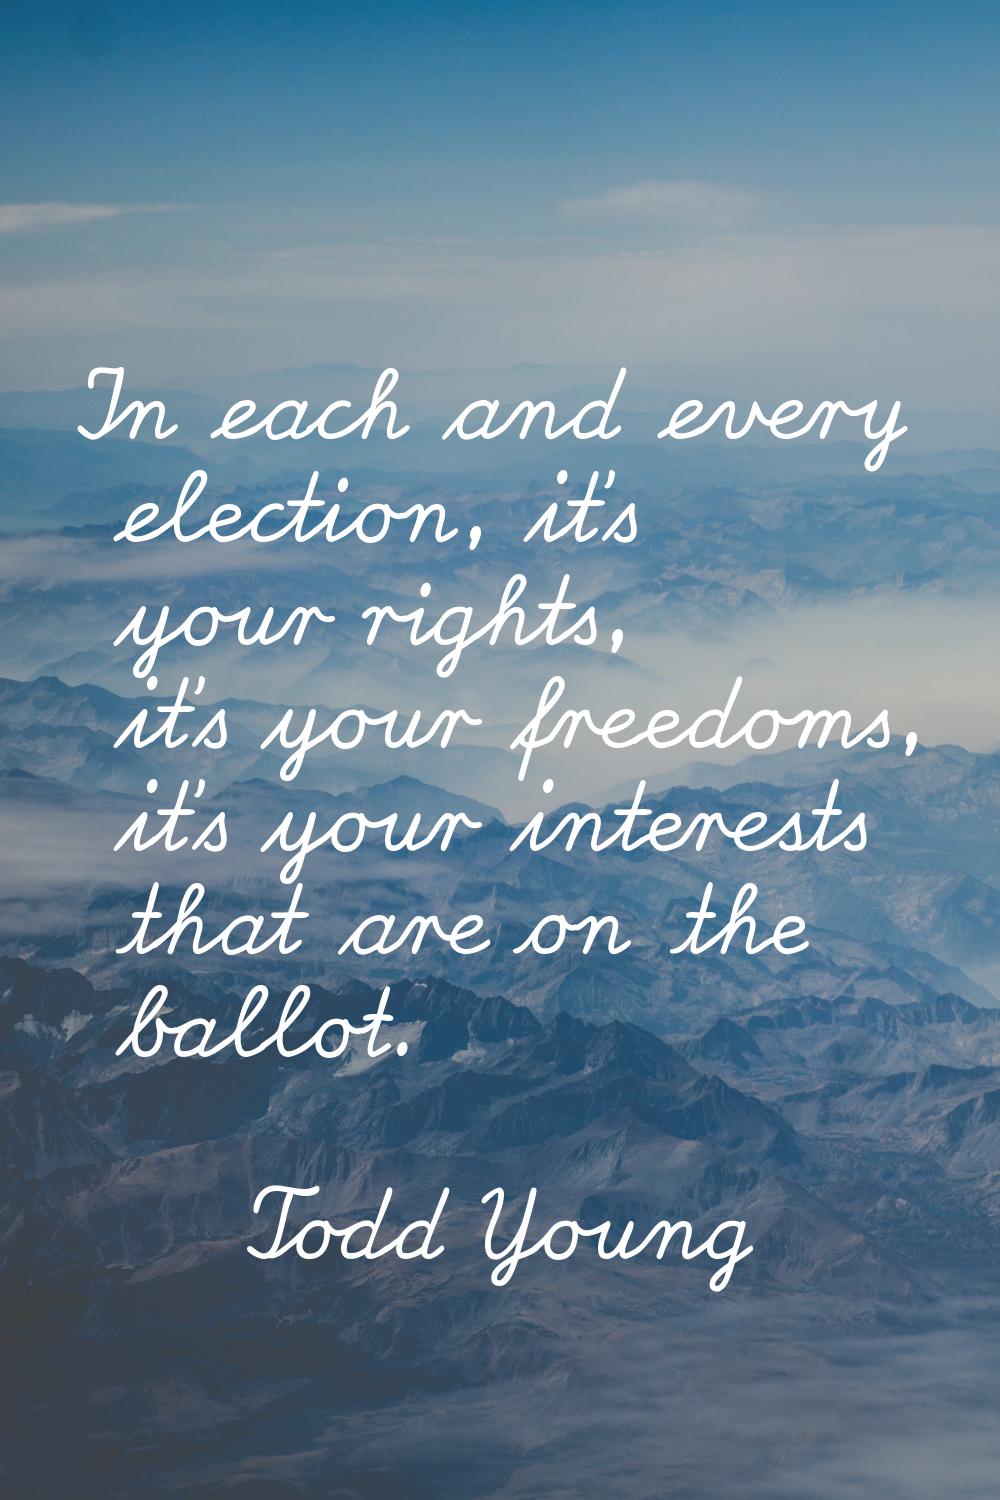 In each and every election, it's your rights, it's your freedoms, it's your interests that are on t